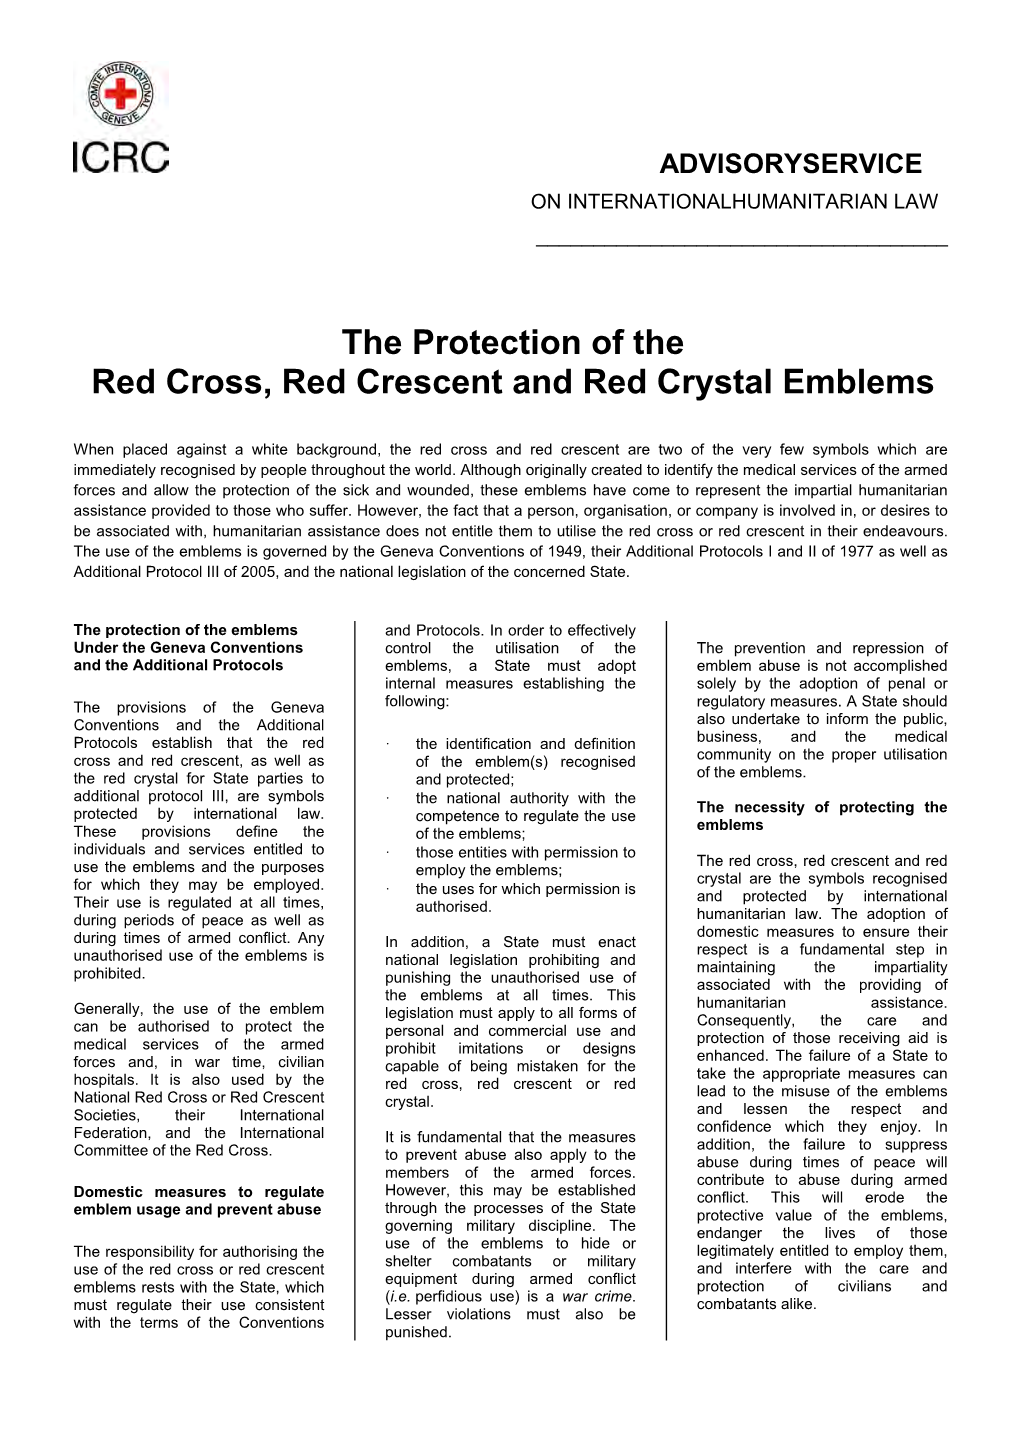 The Protection of the Red Cross, Red Crescent and Red Crystal Emblems